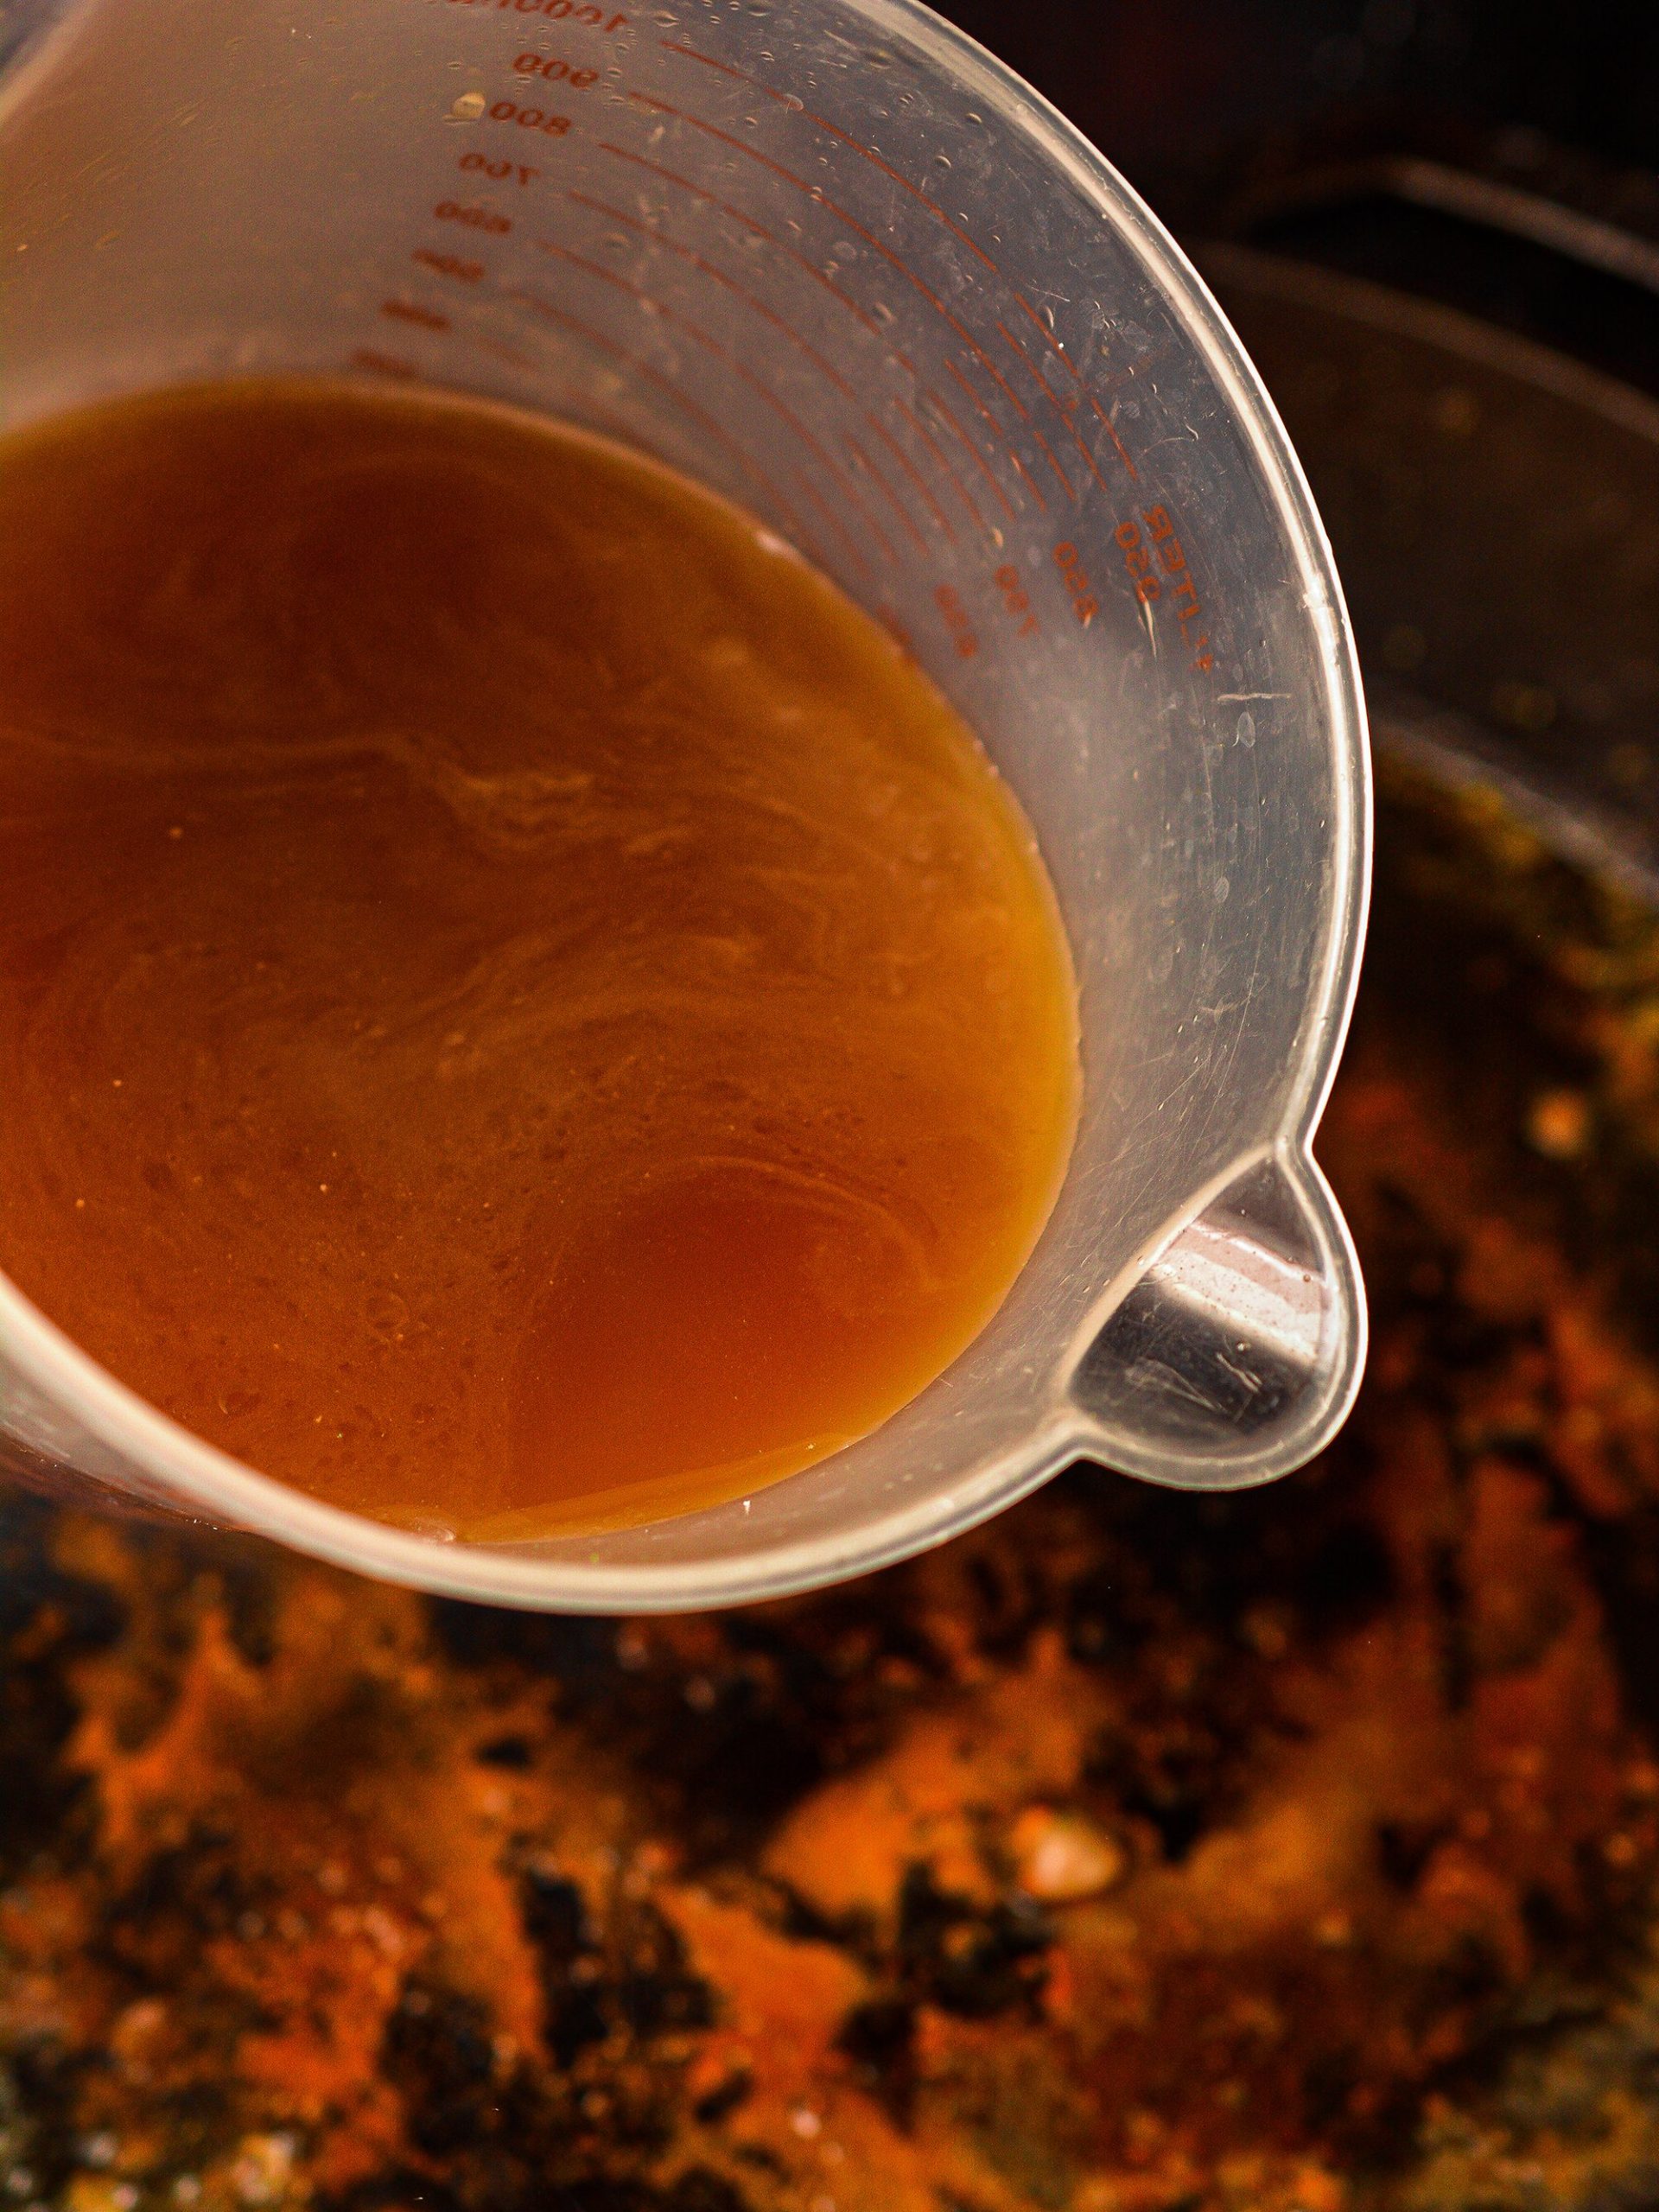 Stir the beef broth into the skillet along with the worcestershire sauce and the balsamic vinegar.